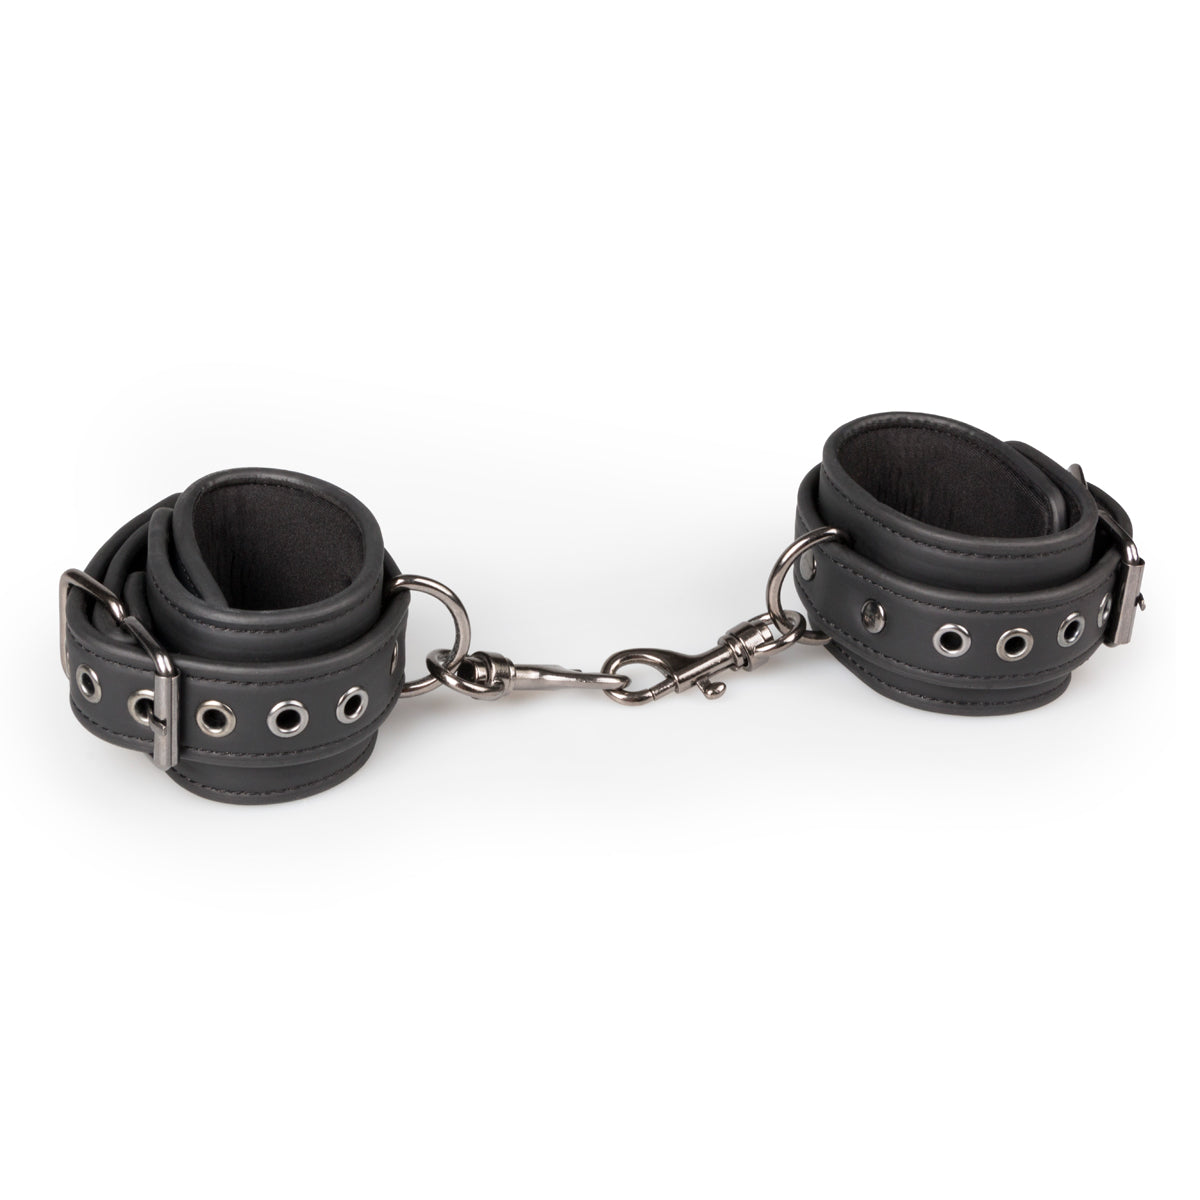 Ankle Cuffs Black - Just for you desires